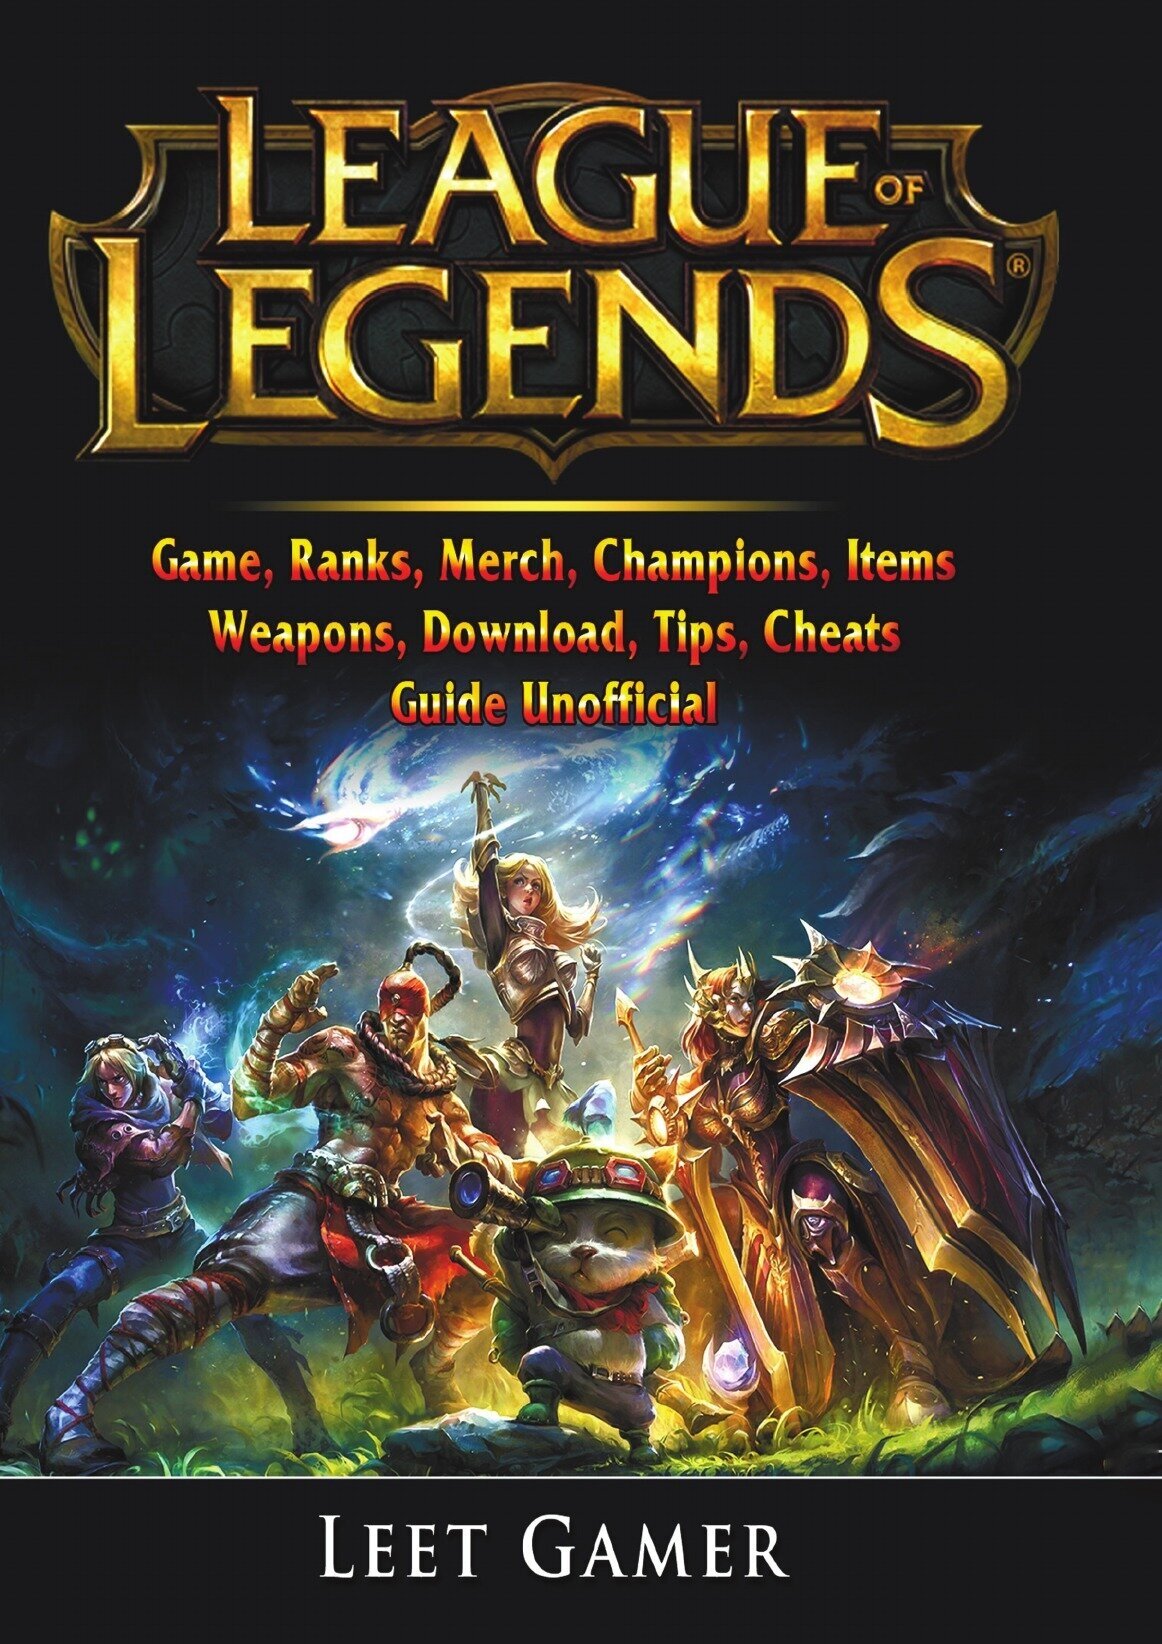 League of Legends Game, Ranks, Merch, Champions, Items, Weapons, Download, Tips, Cheats, Guide Unofficial